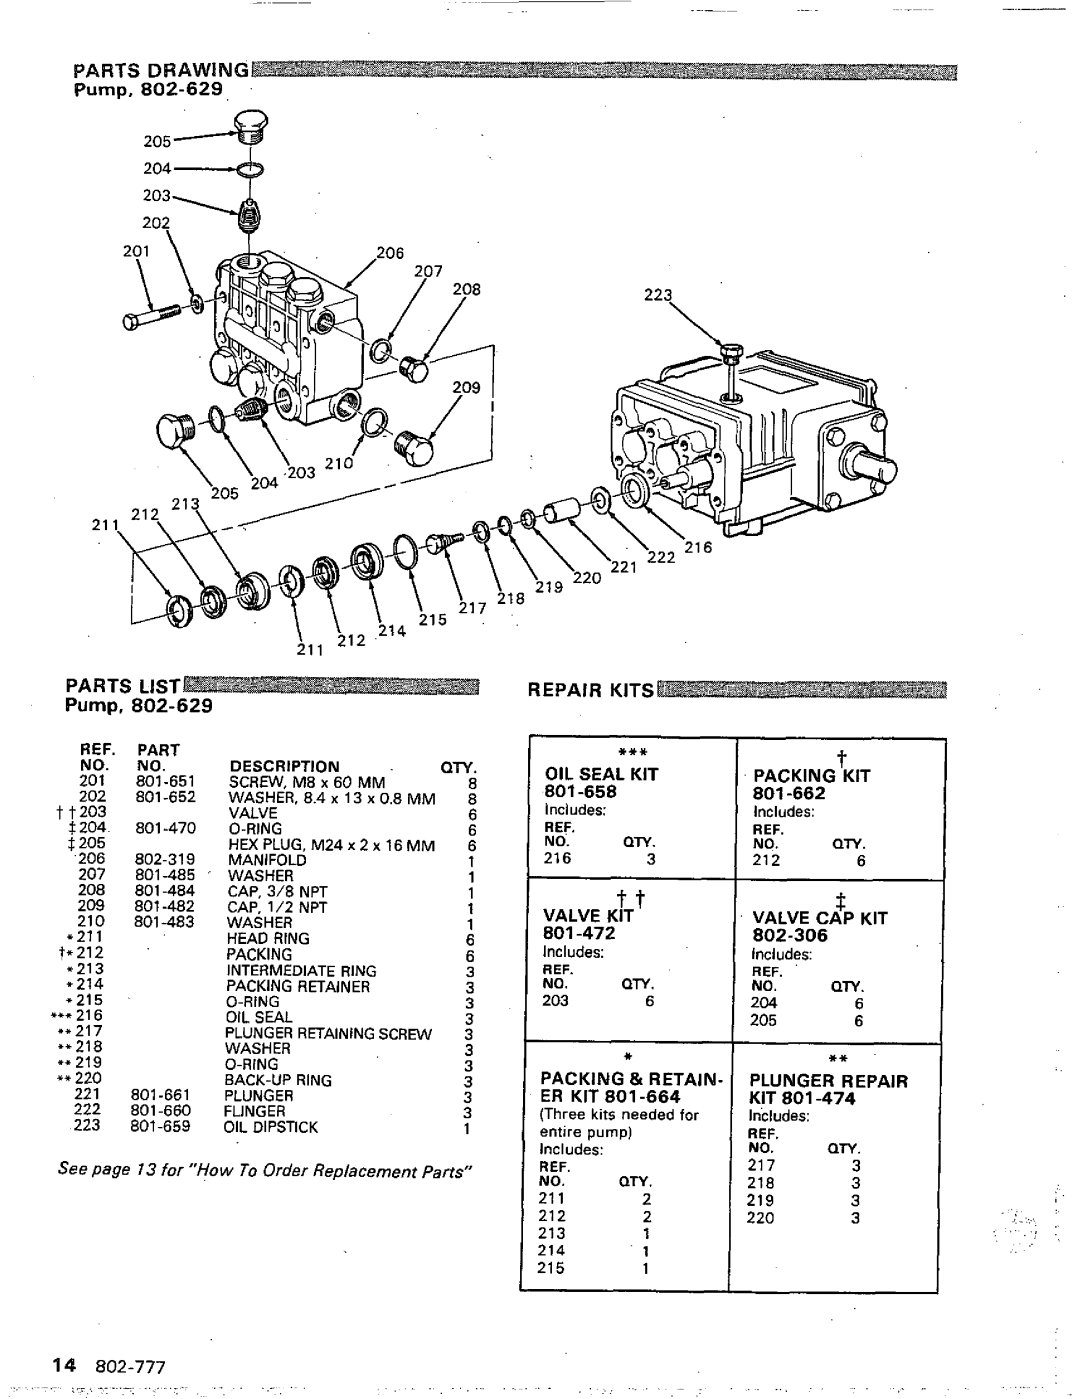 Graco Inc 800-233, 802-777 PARTS LIST Pump, Repair Kits, 801-472, 802-306, See page 13 for How To Order Replacement Parts 